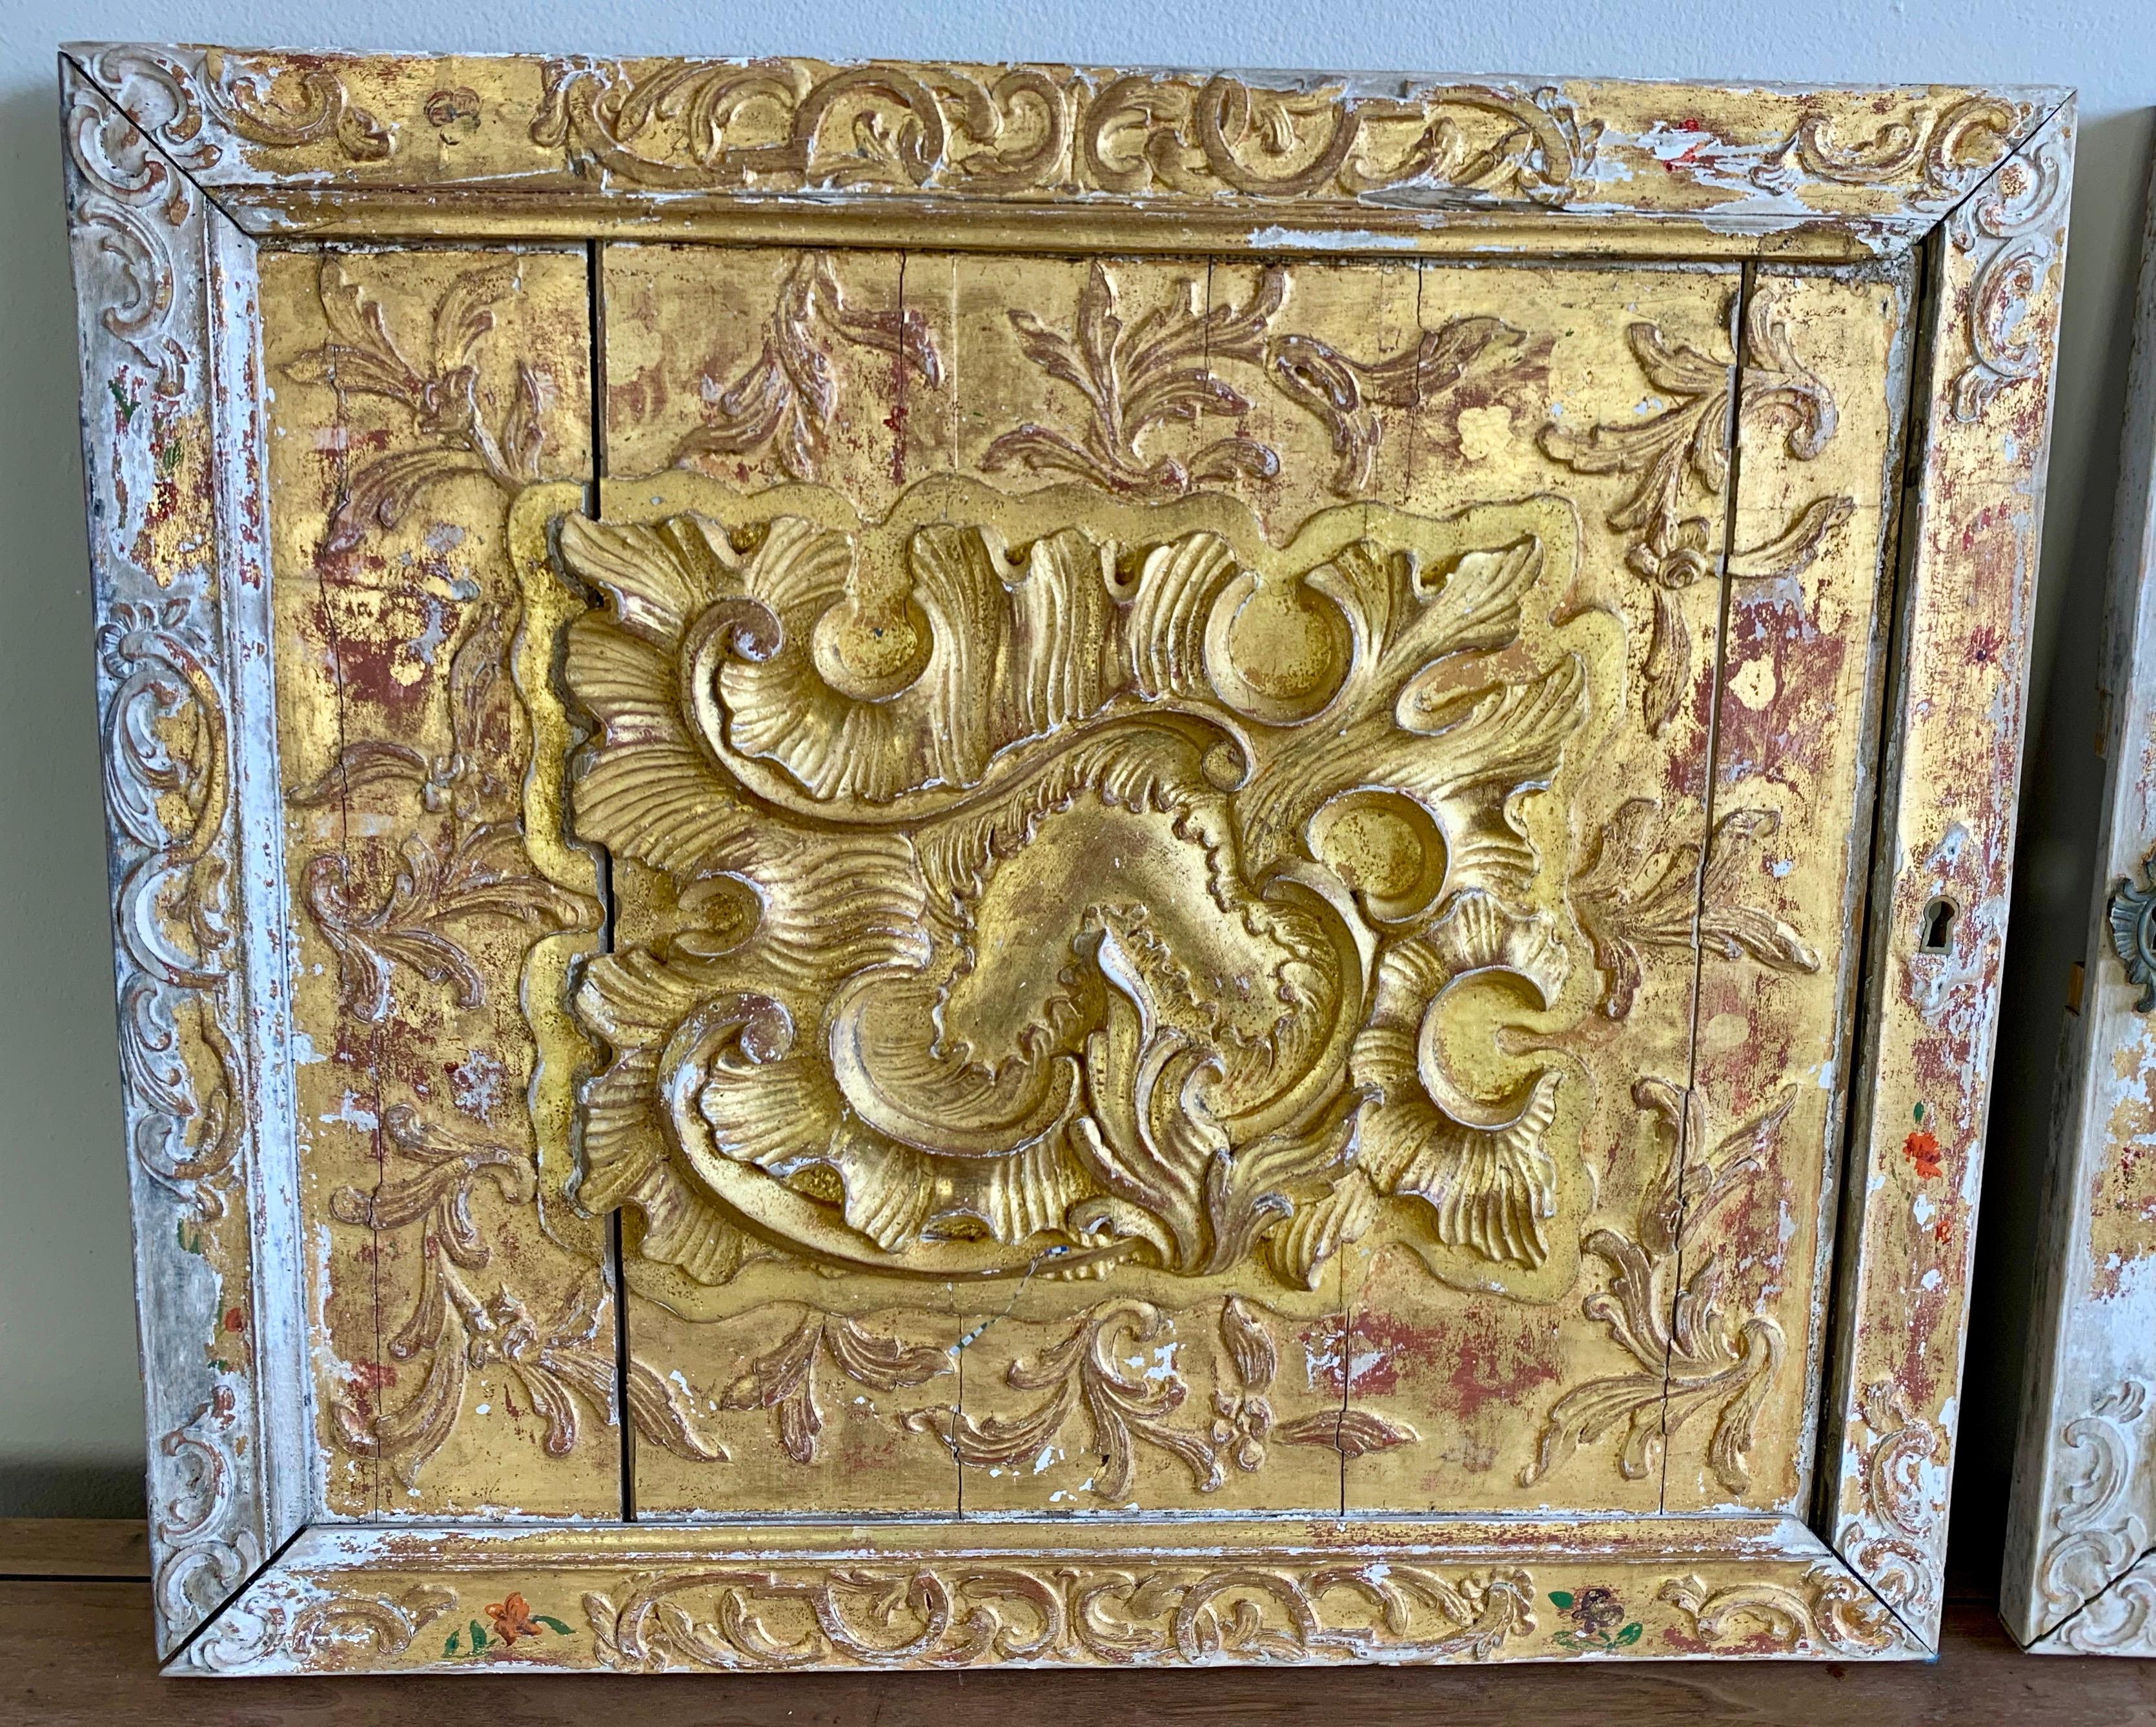 Pair of hand carved giltwood panels that were originally part of a larger piece of furniture. They were cabinet doors as you can still see the key hole cover on one of the panels. These panels could be built into a project or can be hung as unique